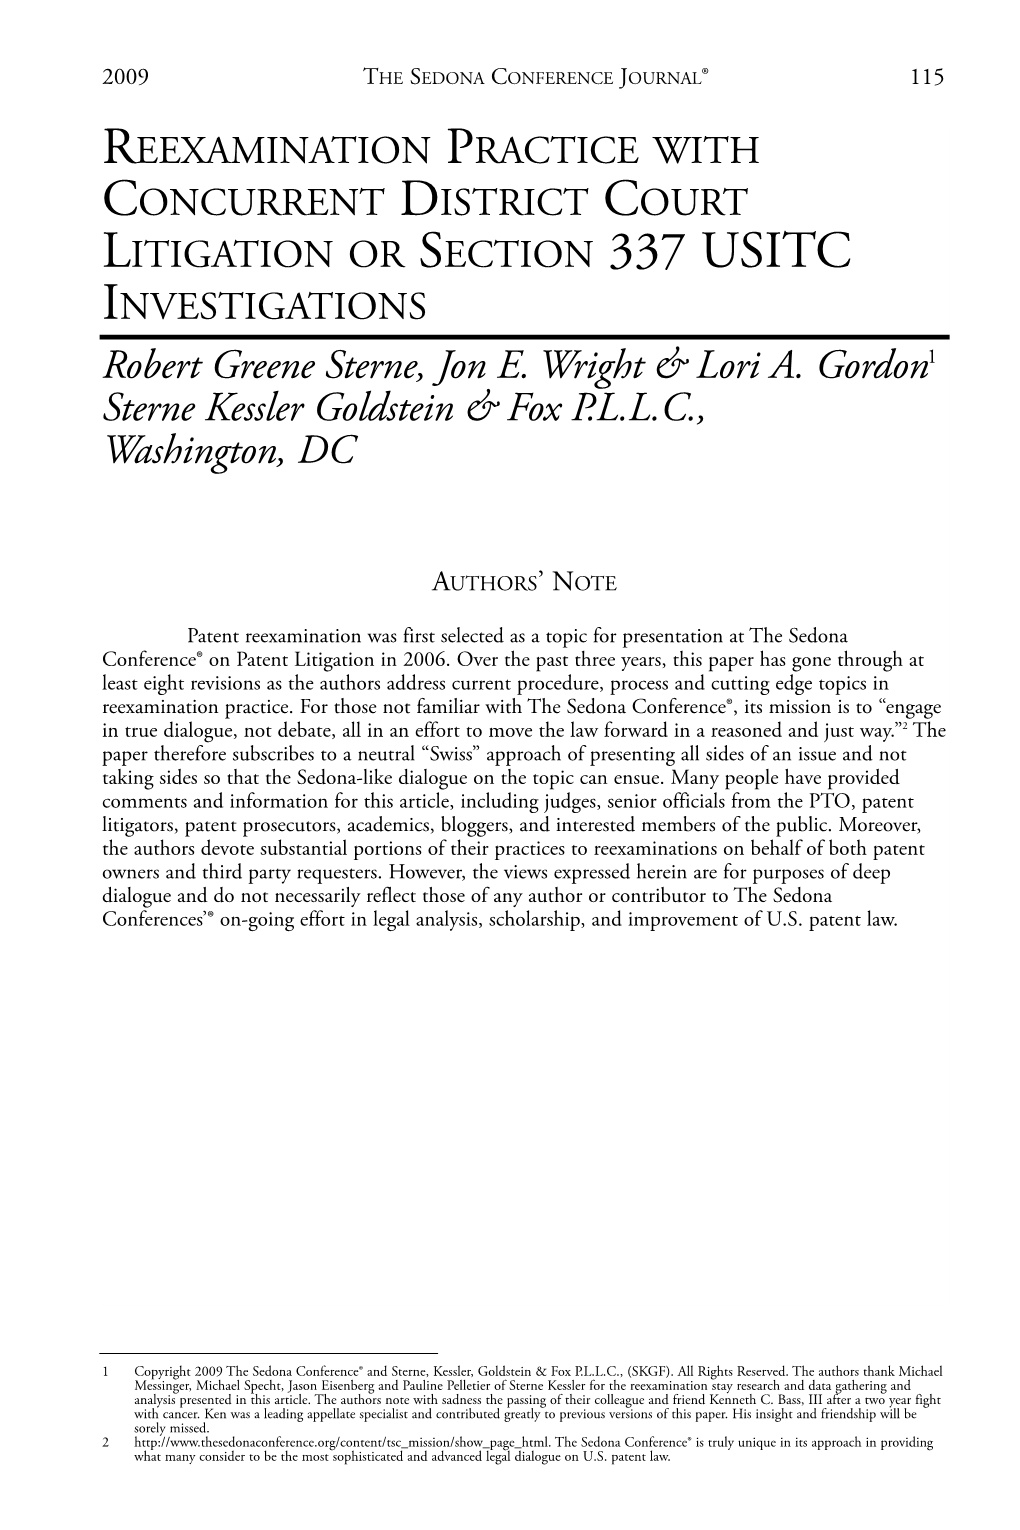 REEXAMINATION PRACTICE with CONCURRENT DISTRICT COURT LITIGATION OR SECTION 337 USITC INVESTIGATIONS Robert Greene Sterne, Jon E